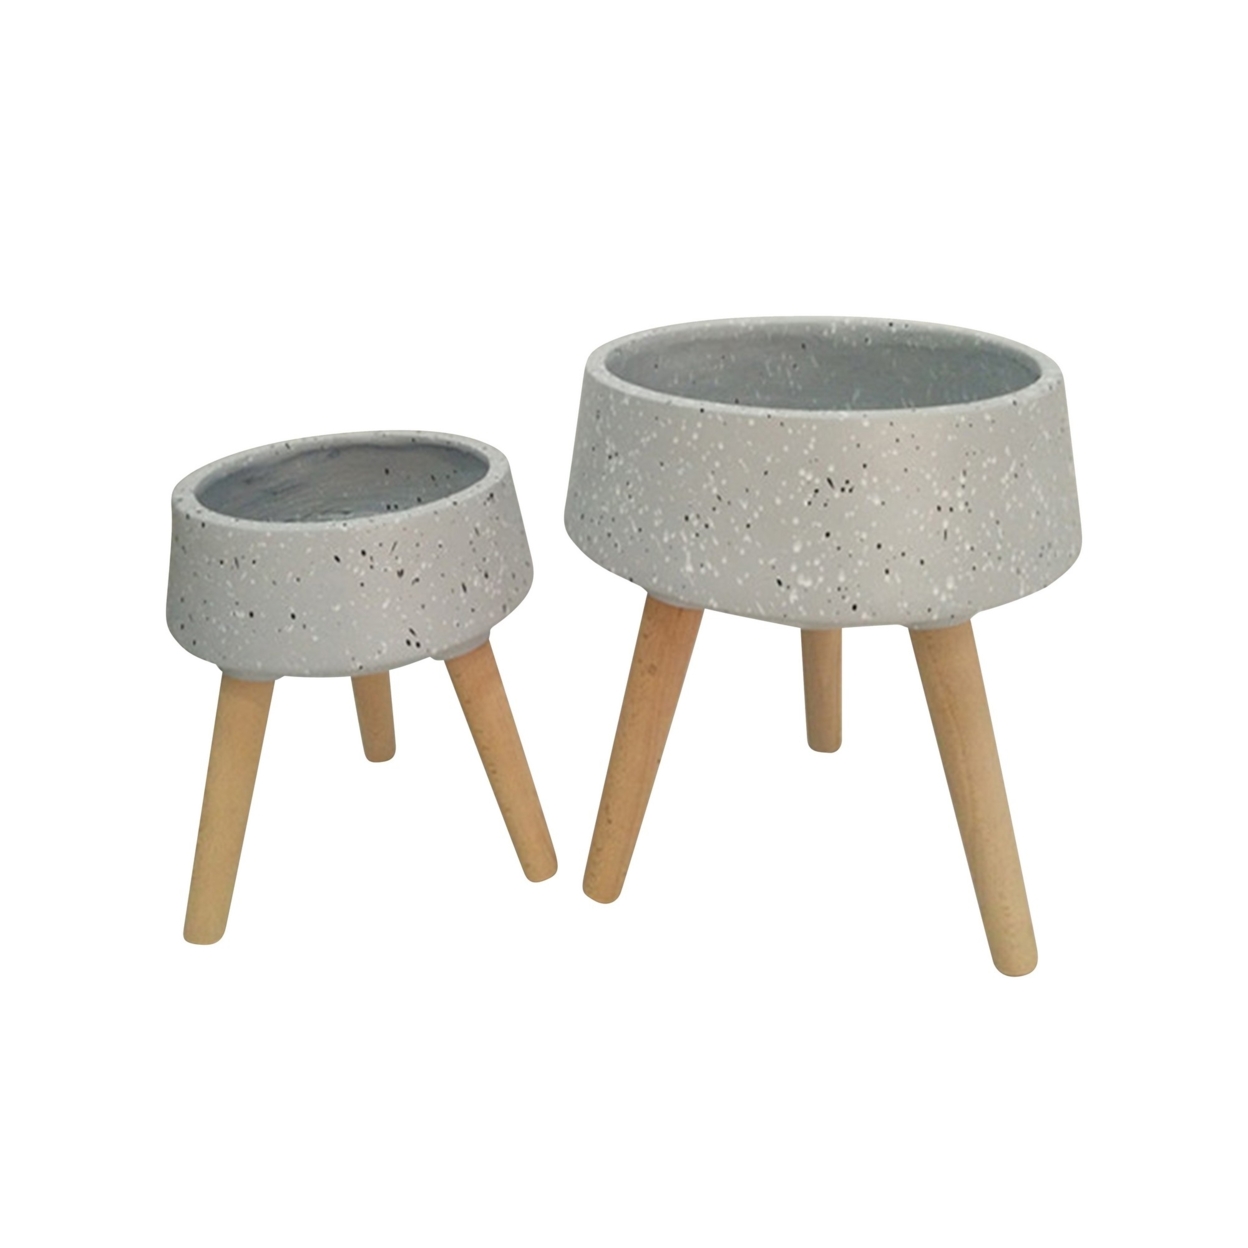 Ceramic Body Planter With Wooden Angled Legs, Set Of Two, Gray And Brown- Saltoro Sherpi